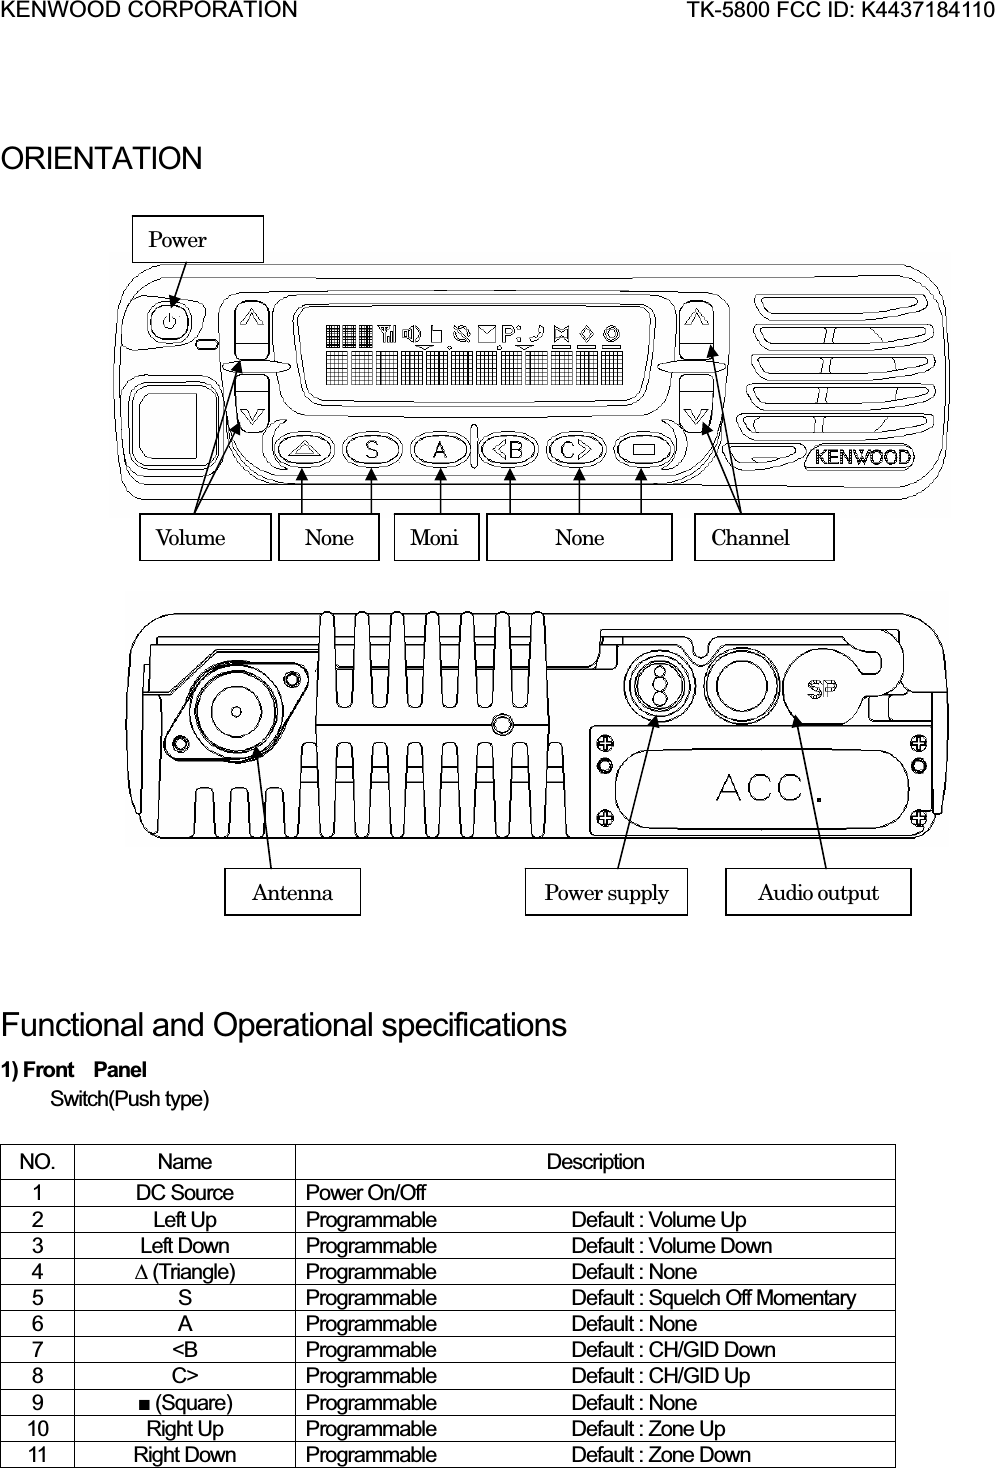 KENWOOD CORPORATION                               TK-5800 FCC ID: K4437184110 ORIENTATIONFunctional and Operational specifications 1) Front  Panel        Switch(Push type)                   NO. Name  Description 1 DC Source Power On/Off 2  Left Up  Programmable    Default : Volume Up 3  Left Down  Programmable    Default : Volume Down 4¨ (Triangle)  Programmable    Default : None 5  S  Programmable    Default : Squelch Off Momentary 6  A  Programmable    Default : None 7  &lt;B  Programmable    Default : CH/GID Down 8  C&gt;  Programmable    Default : CH/GID Up 9Ŷ (Square)  Programmable    Default : None 10  Right Up  Programmable    Default : Zone Up 11  Right Down  Programmable    Default : Zone Down            Volume  ChannelMoniNone  None Audio output Antenna  Power supply Power 